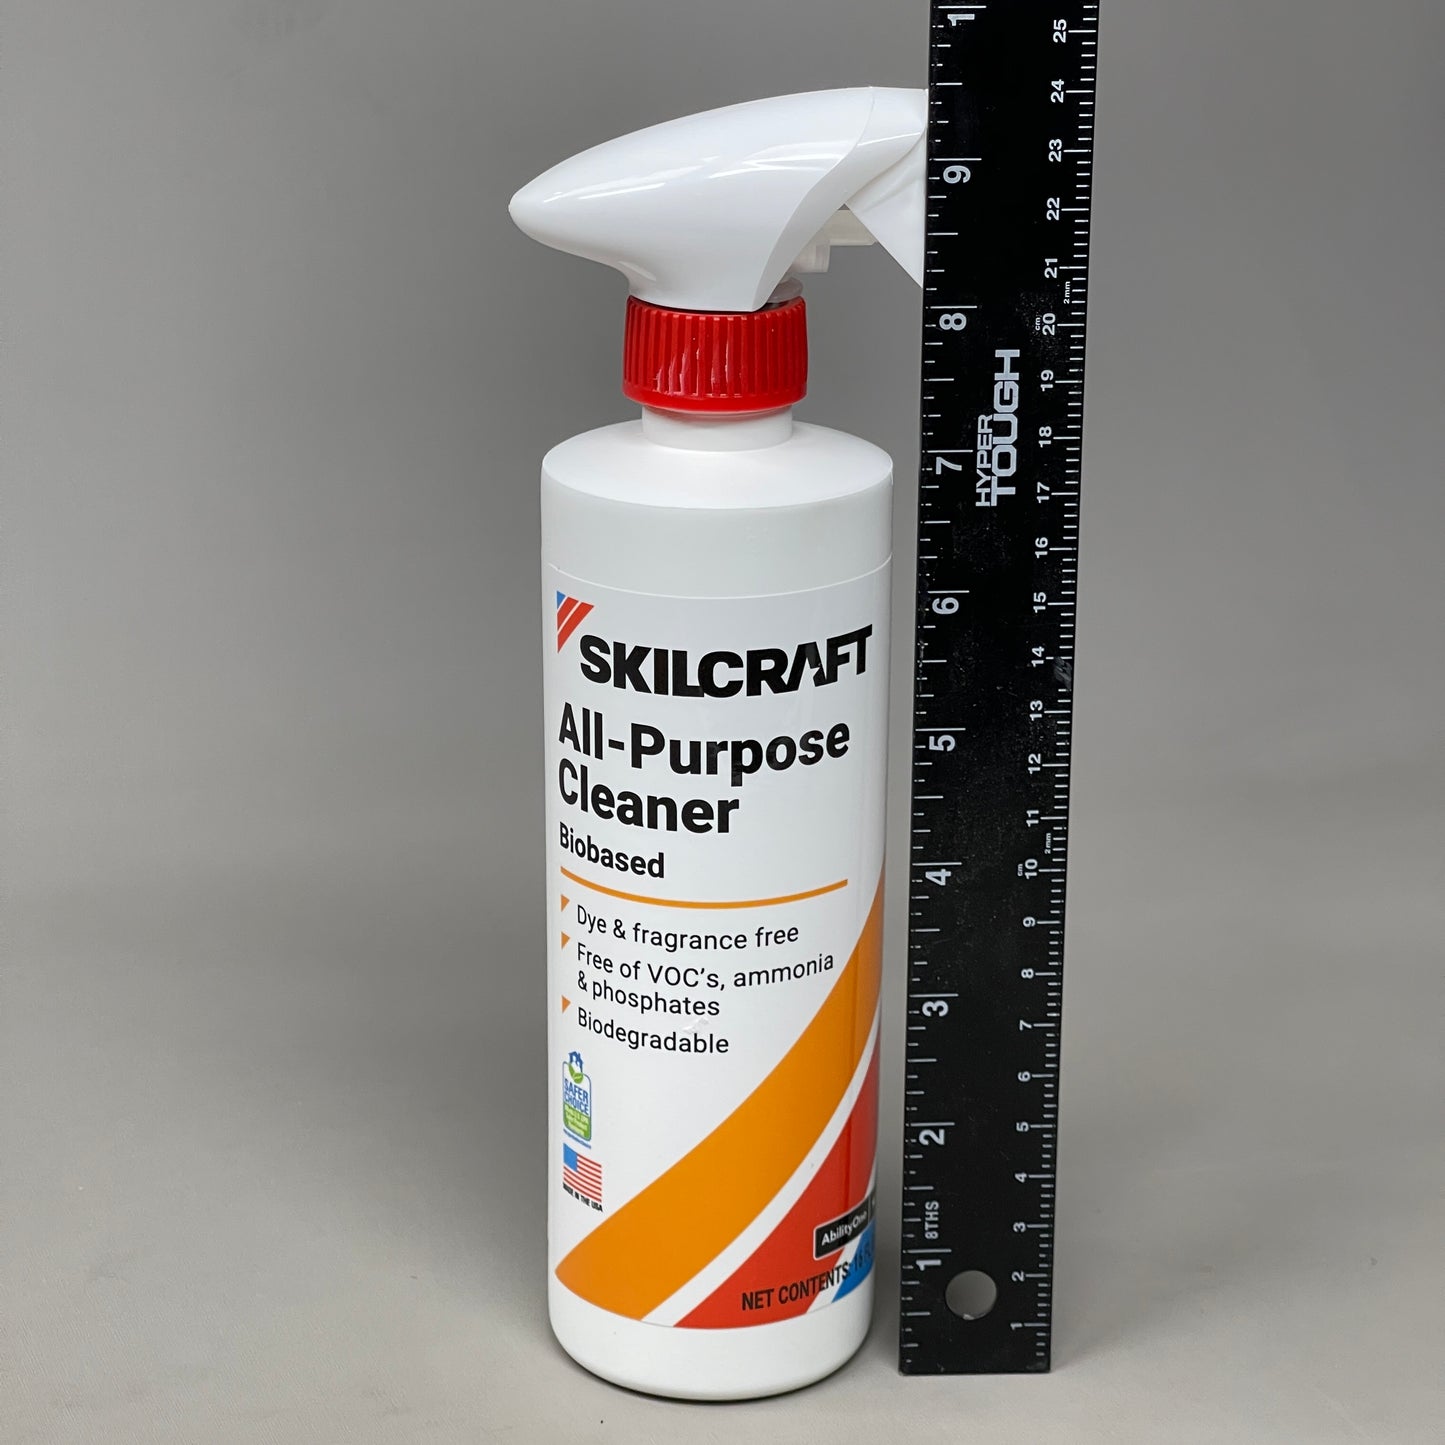 SKILCRAFT All Purpose Cleaner Biobased 4-PACK 16 oz Spray Bottle 9265280 (New)